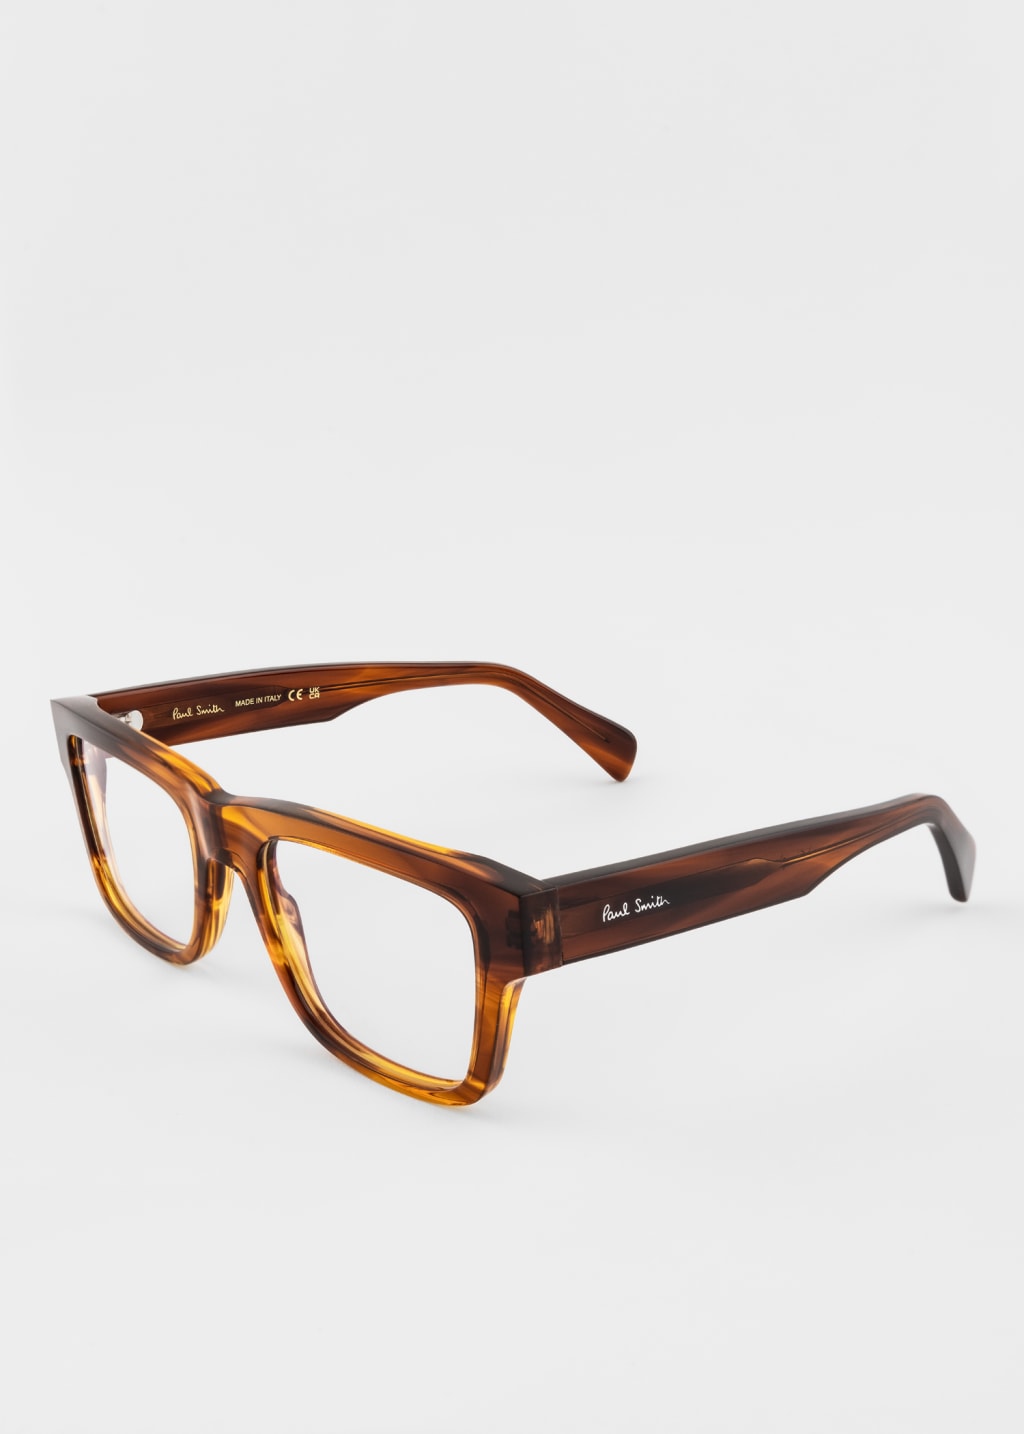 Angled view - Striped Brown 'Kimpton' Spectacles Paul Smith